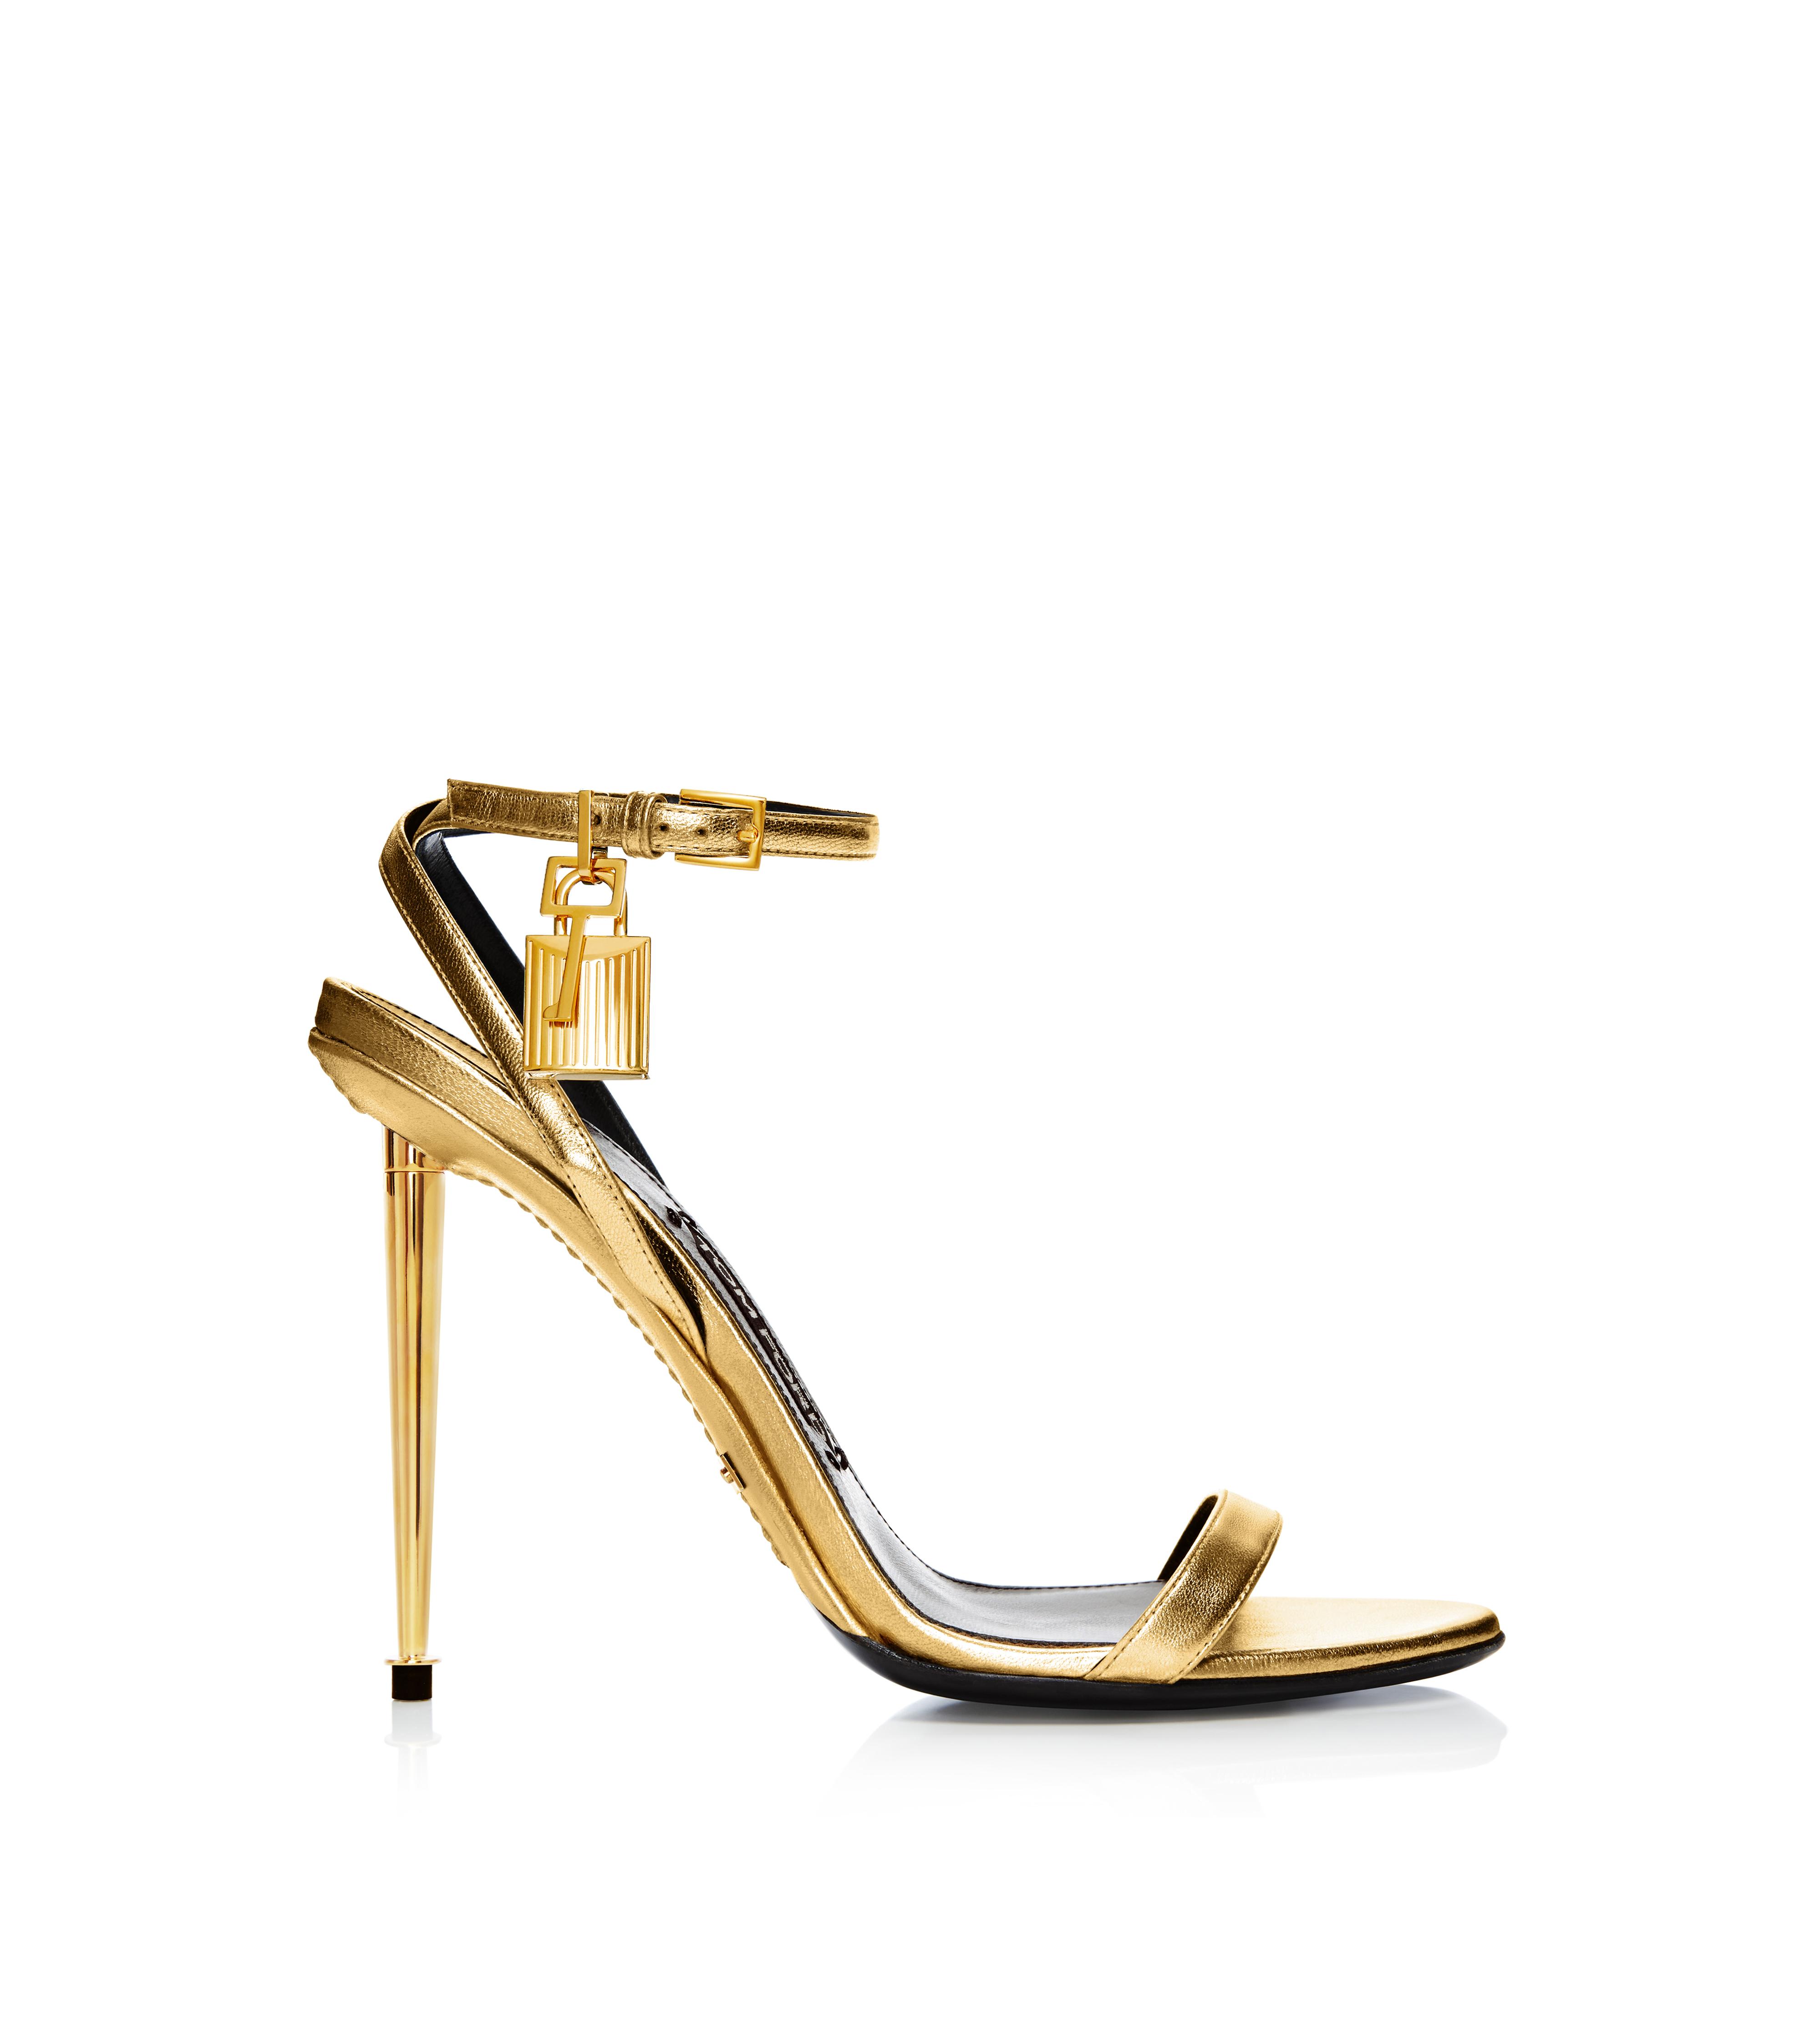 Sandals - Women's Shoes by TOM FORD - Designer Shoes for Women ...